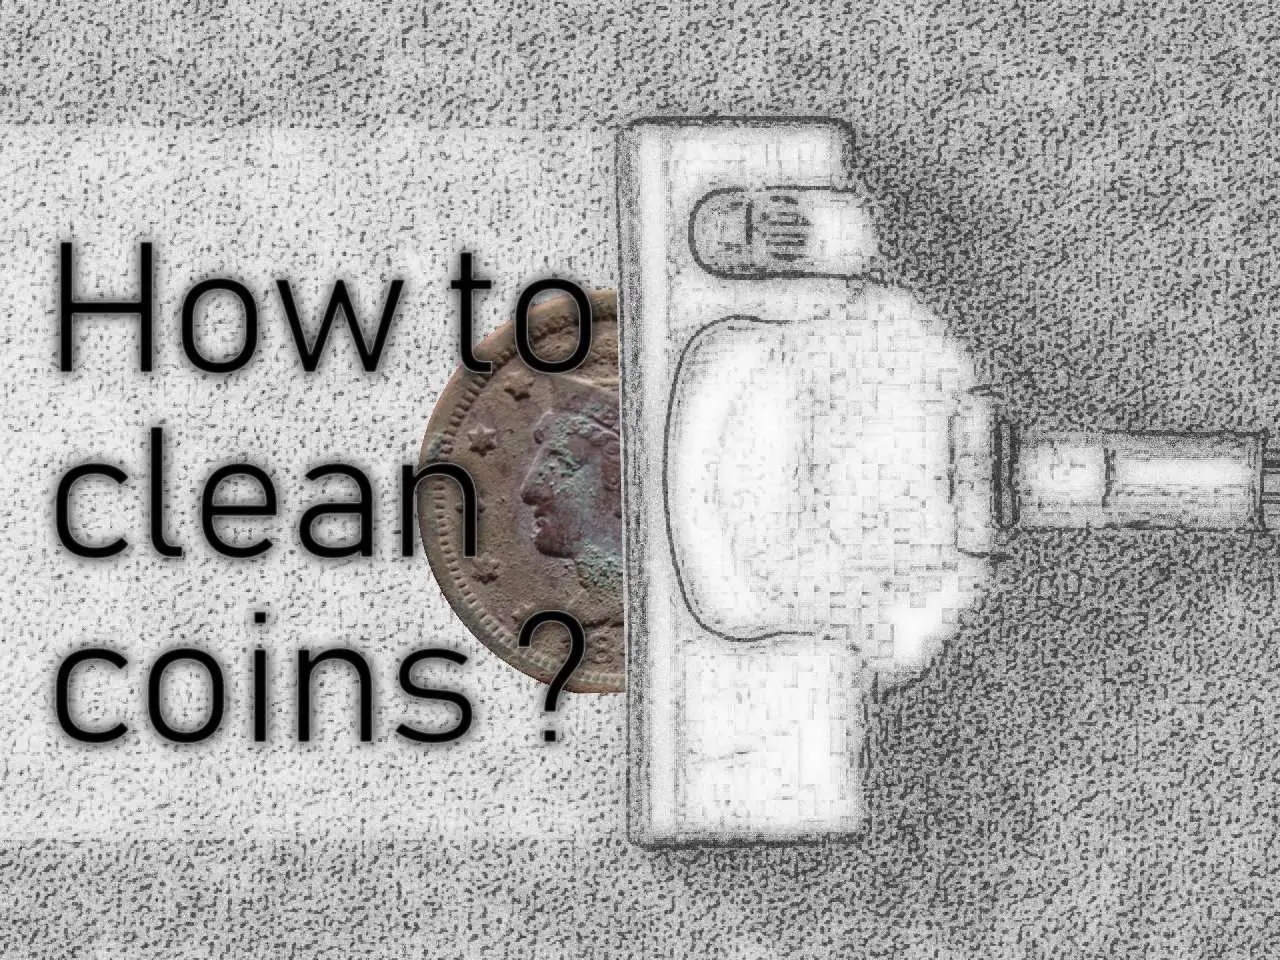 How to clean gold coins, bars, and jewellery  coininvest.com